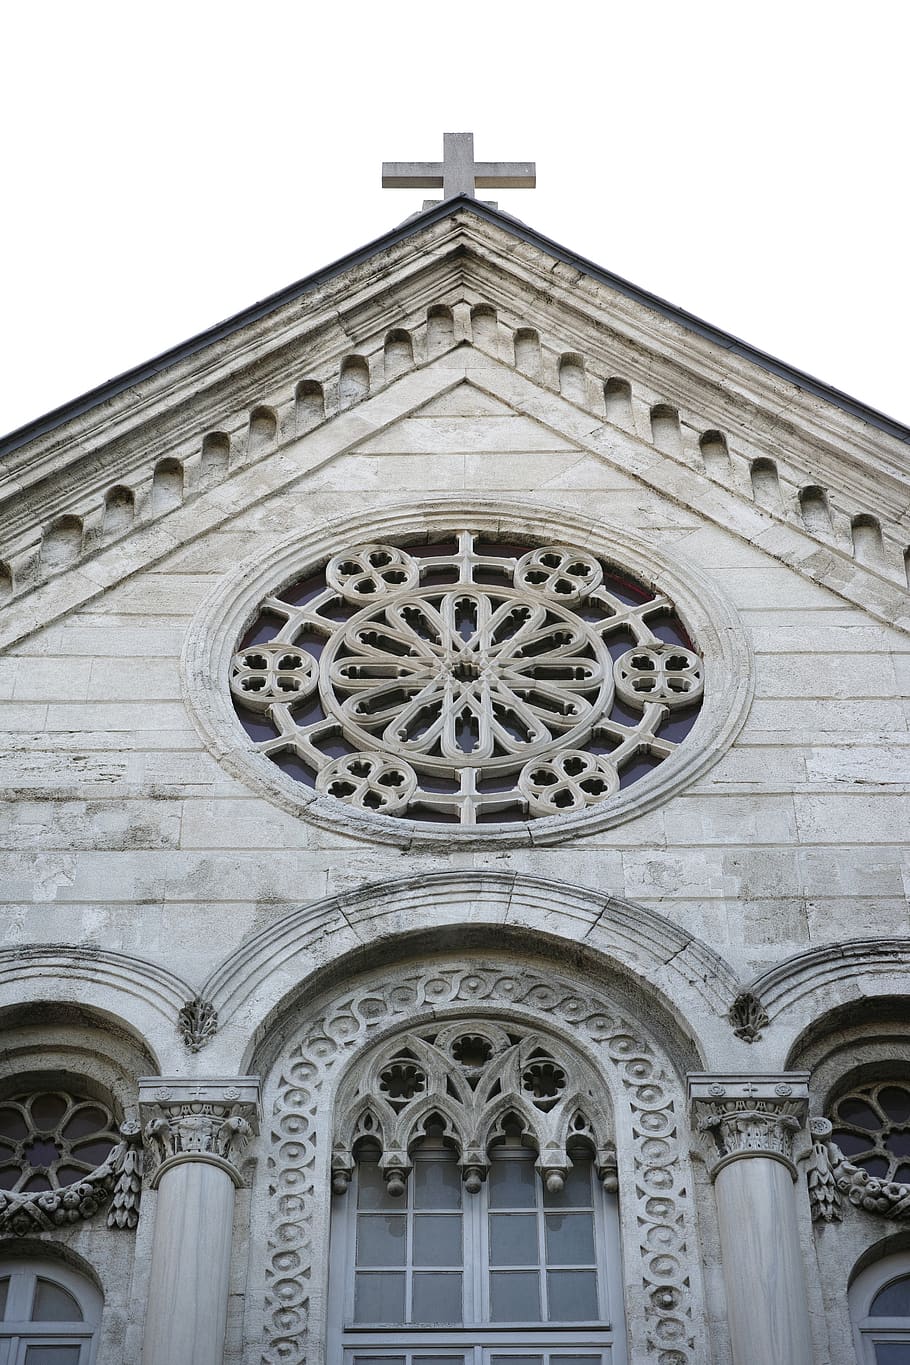 The facade of the church of San Giovanni Battista in Savona, Italy, features a rose window and a cross. - Cross